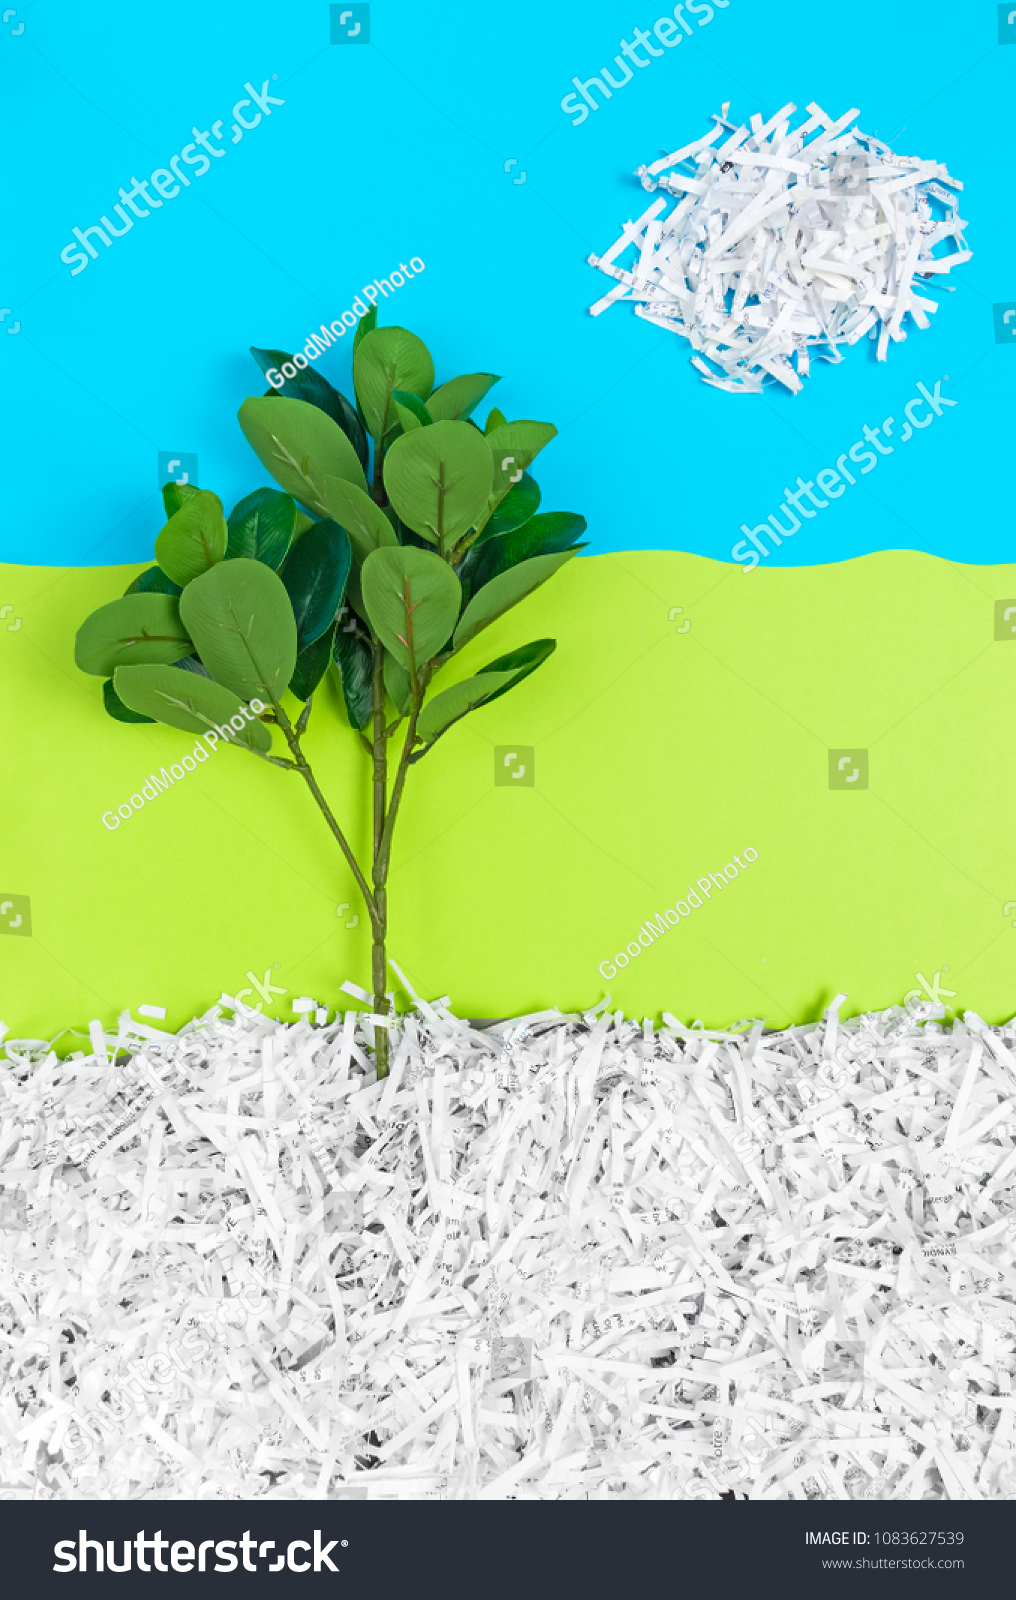 Green Tree Growing Recycled Shredded Paper Stock Photo Edit Now 1083627539